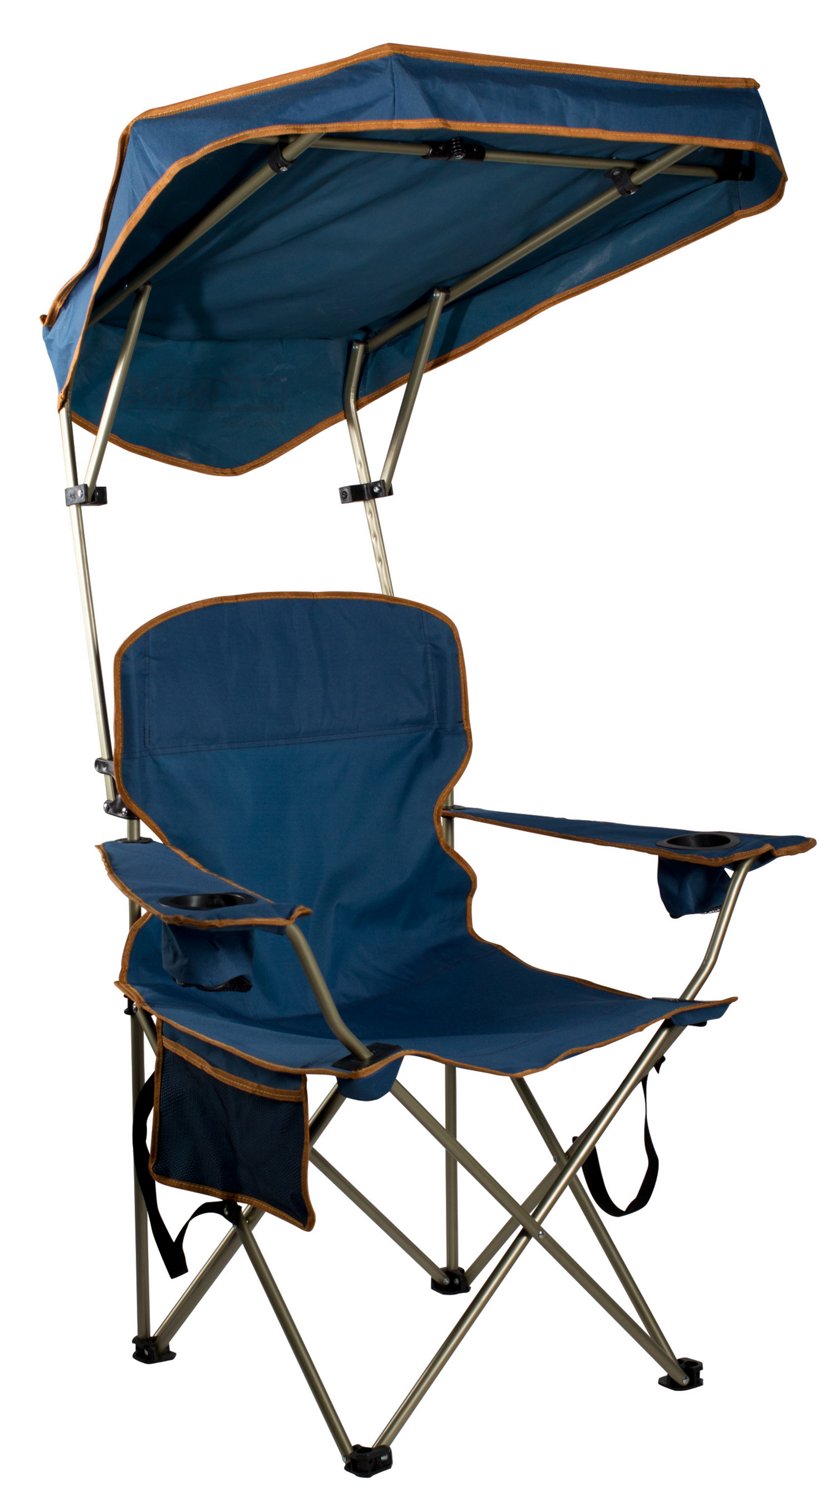 Portable Camping Chairs with Shade Canopy,Folding Outdoor Canopy